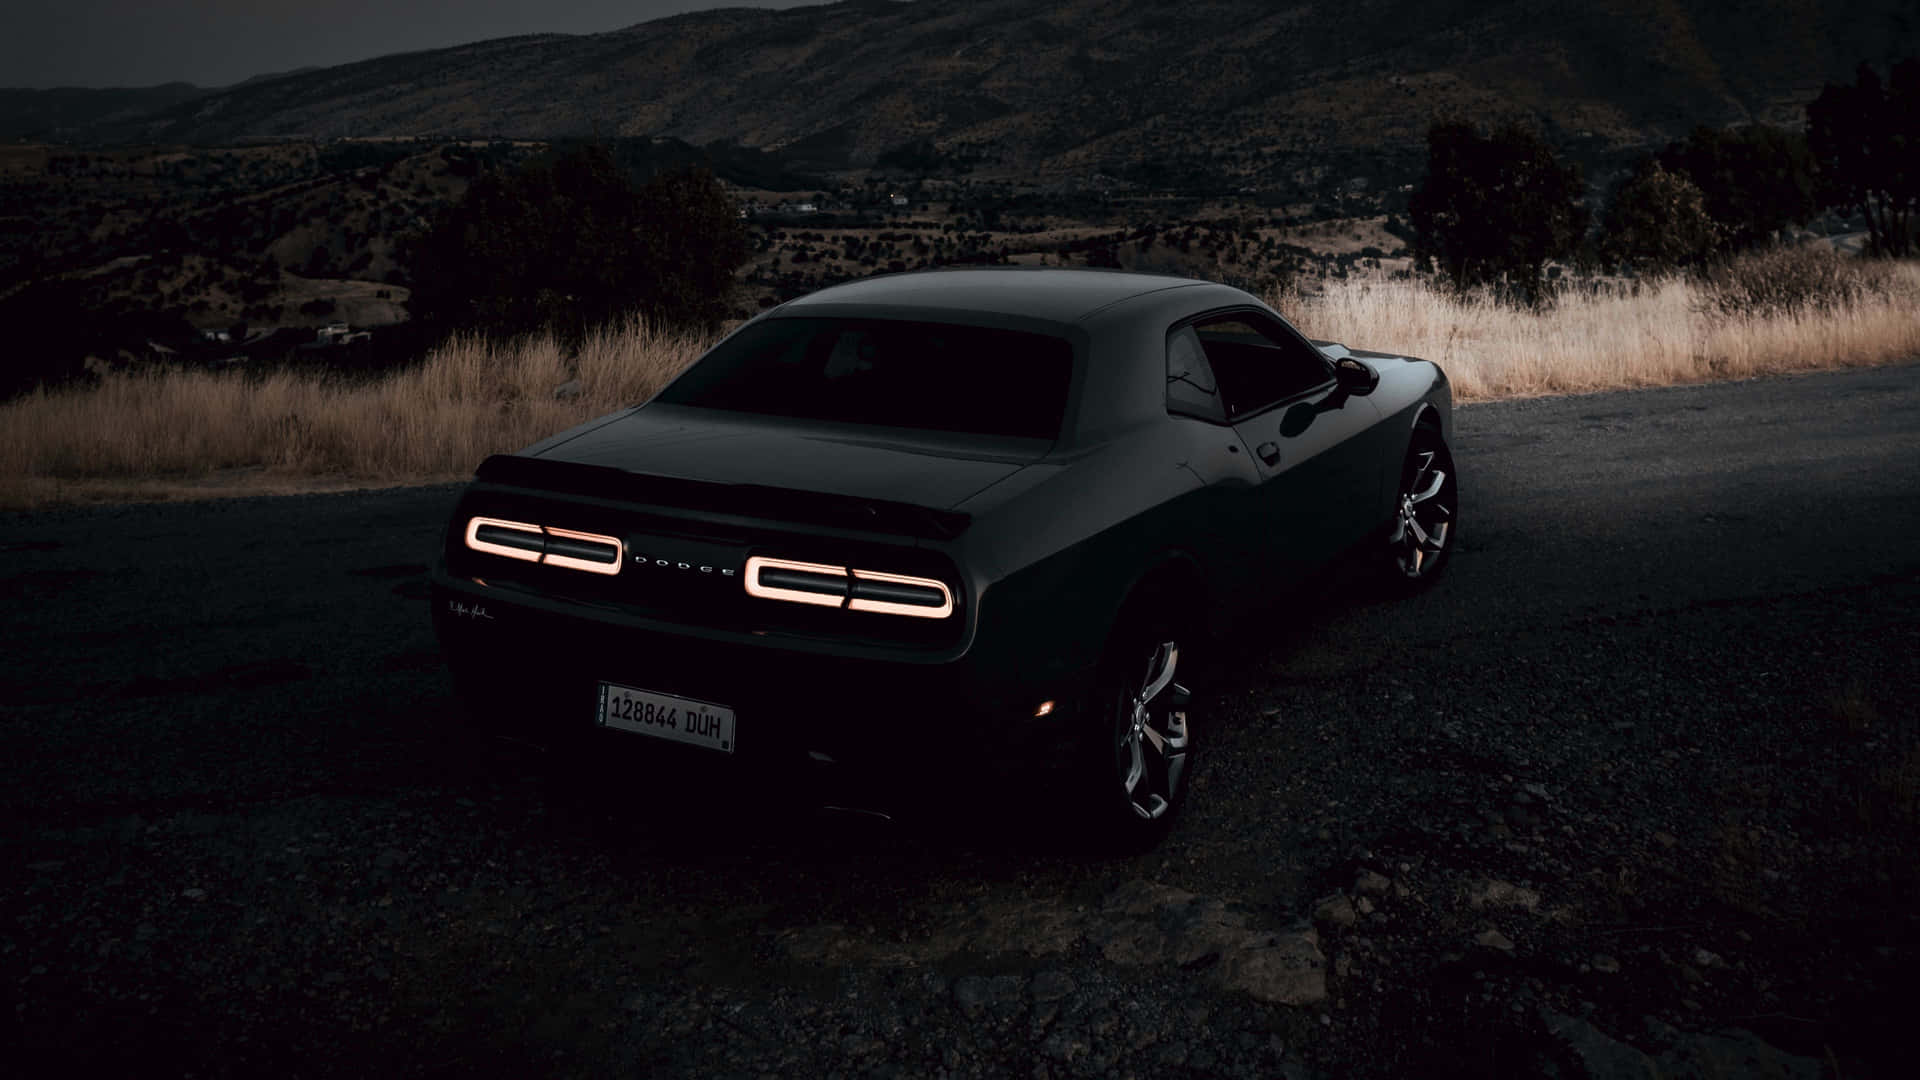 Feel the thrill of the open road in a Dodge Challenger Wallpaper